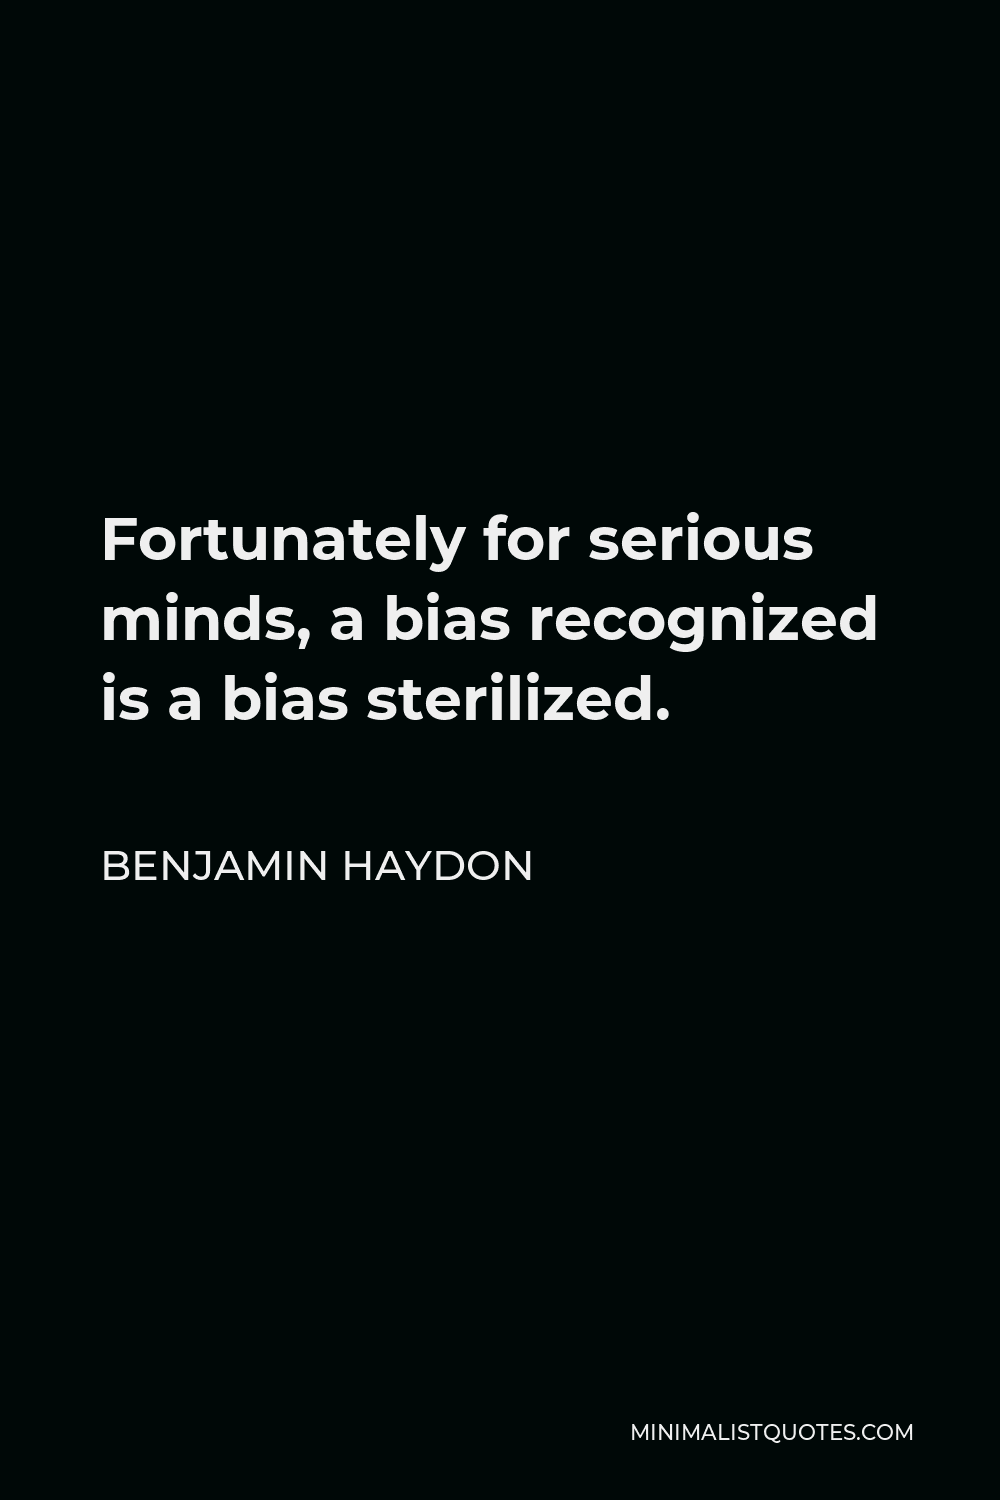 Benjamin Haydon Quote - Fortunately for serious minds, a bias recognized is a bias sterilized.